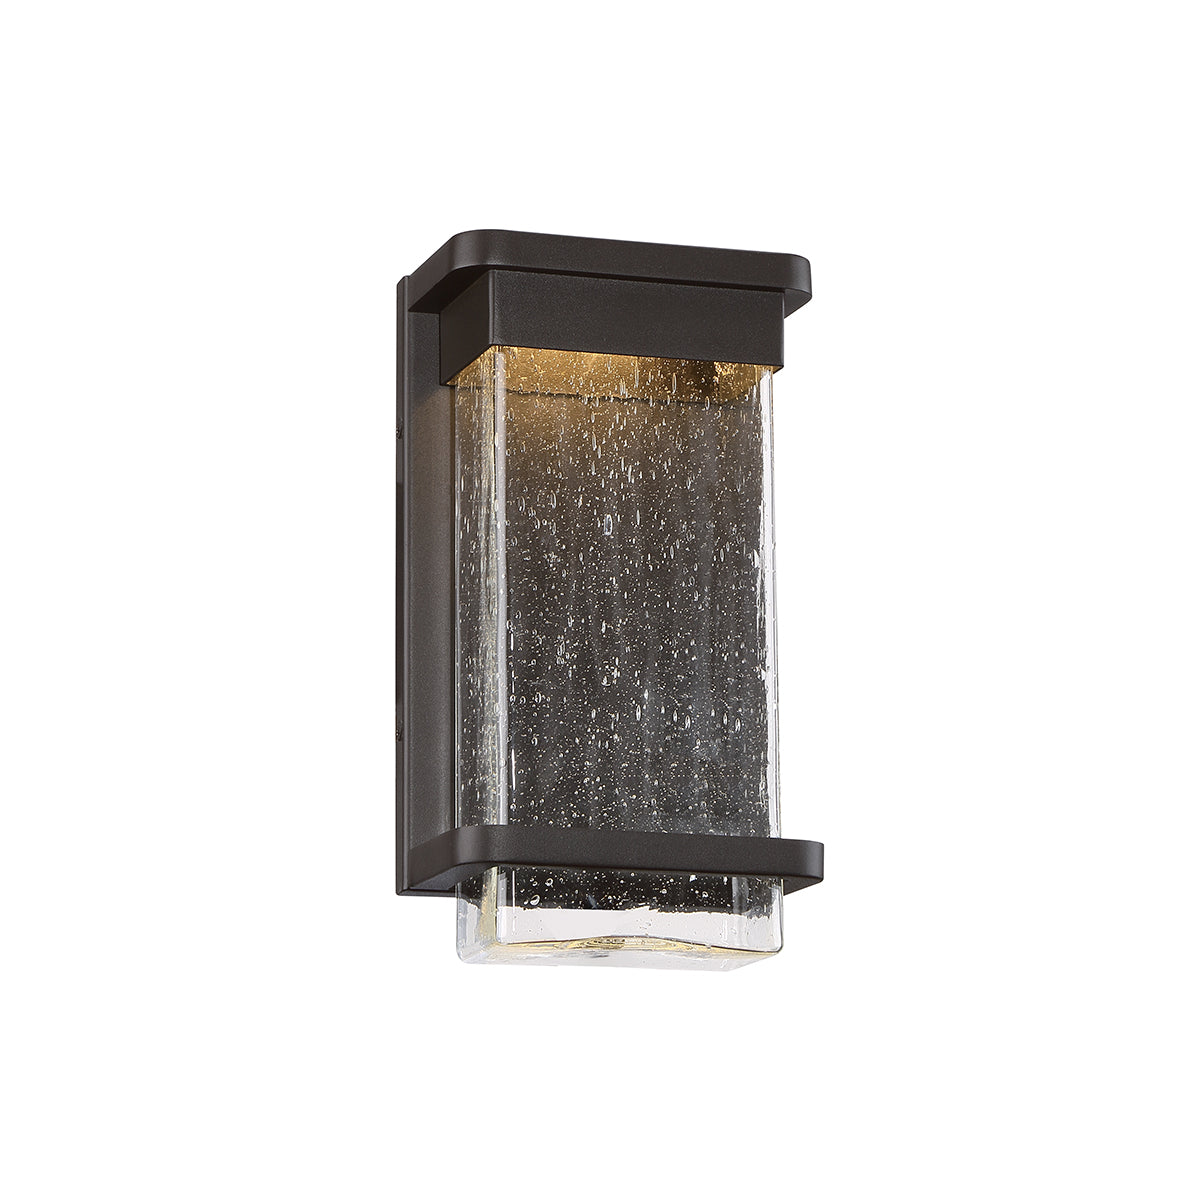 Modern Forms Canada - LED Outdoor Wall Sconce - Vitrine - Bronze- Union Lighting Luminaires Decor